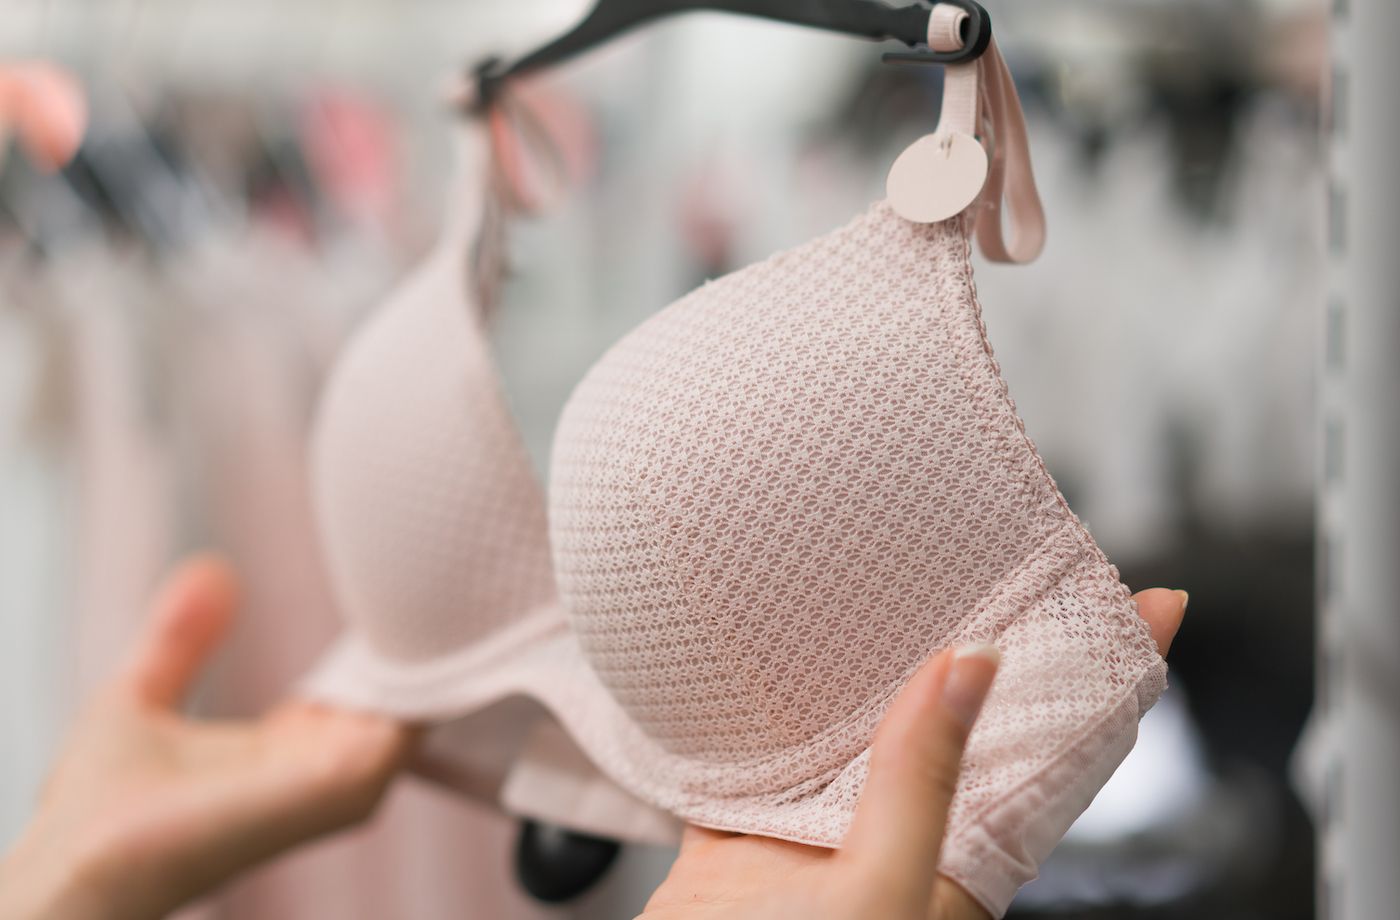 Women's Thin Bra That Makes Large Breasts Look Smaller, Collects Side  Breasts, Prevents Sagging, Gives Lift & Support, Padded With Wire To Shape  Bust